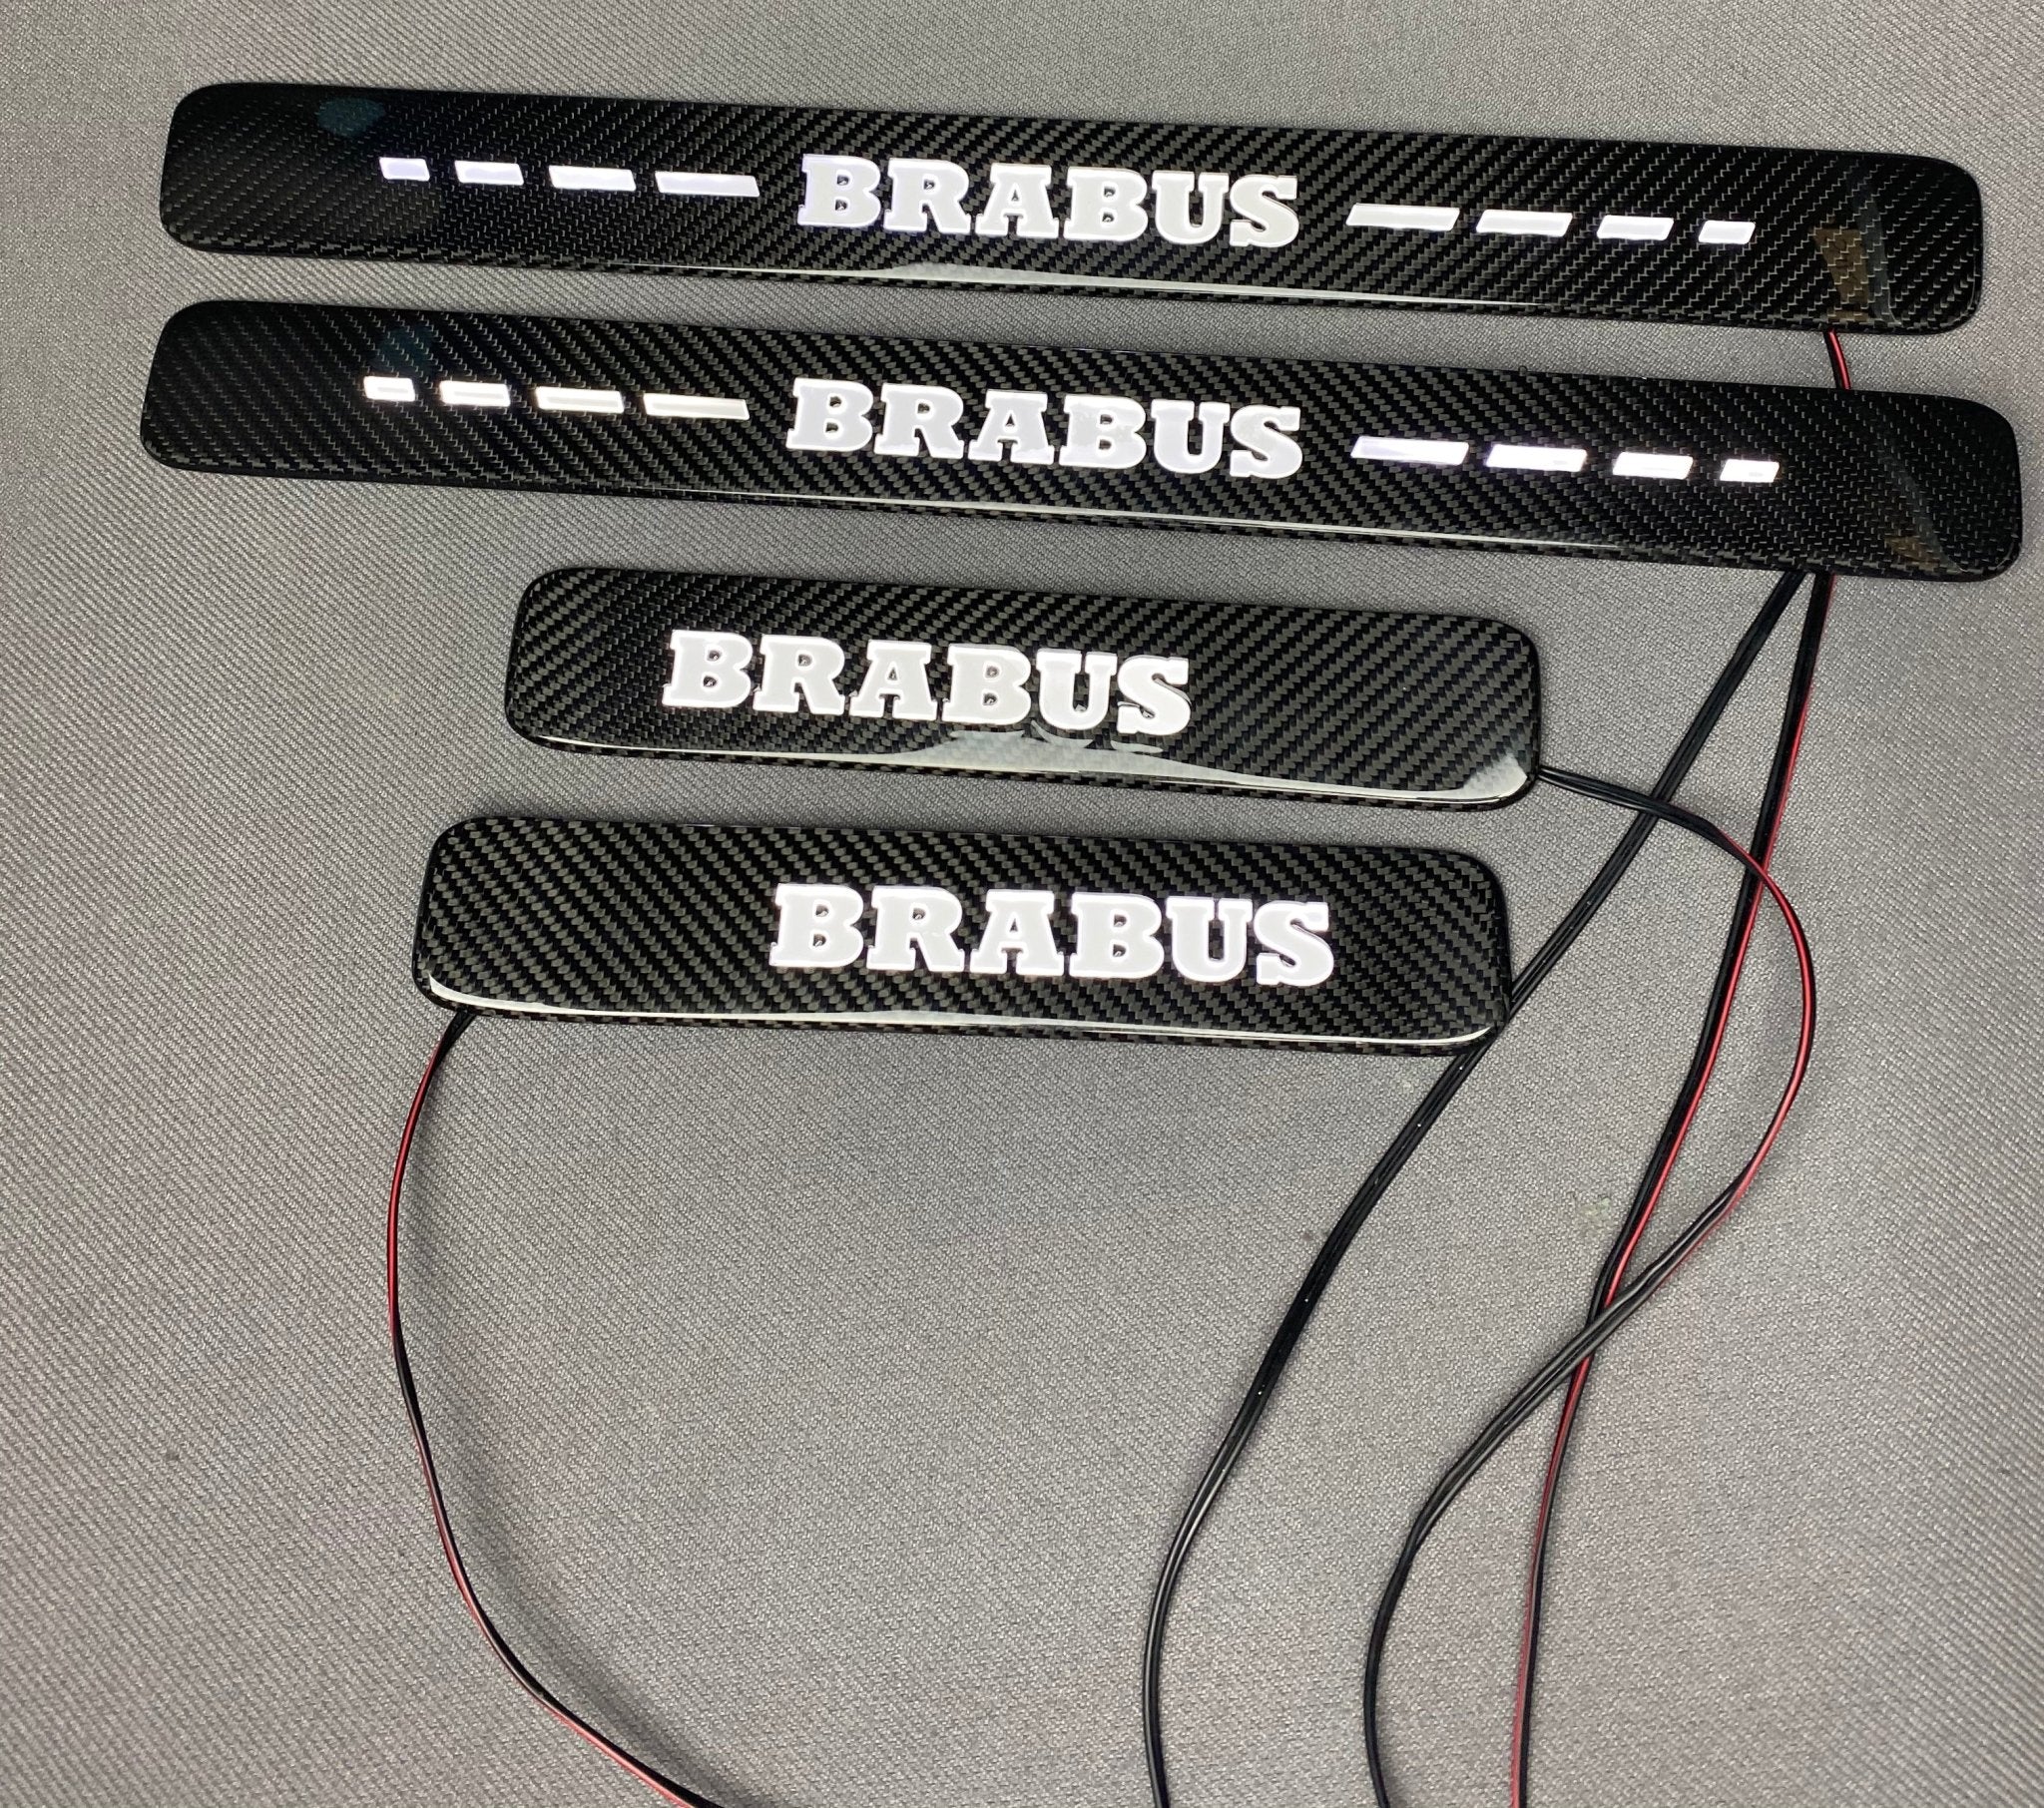 Brabus style Carbon Fiber Door Sills LED white illuminated for Mercedes-Benz w463a w464 G Wagon